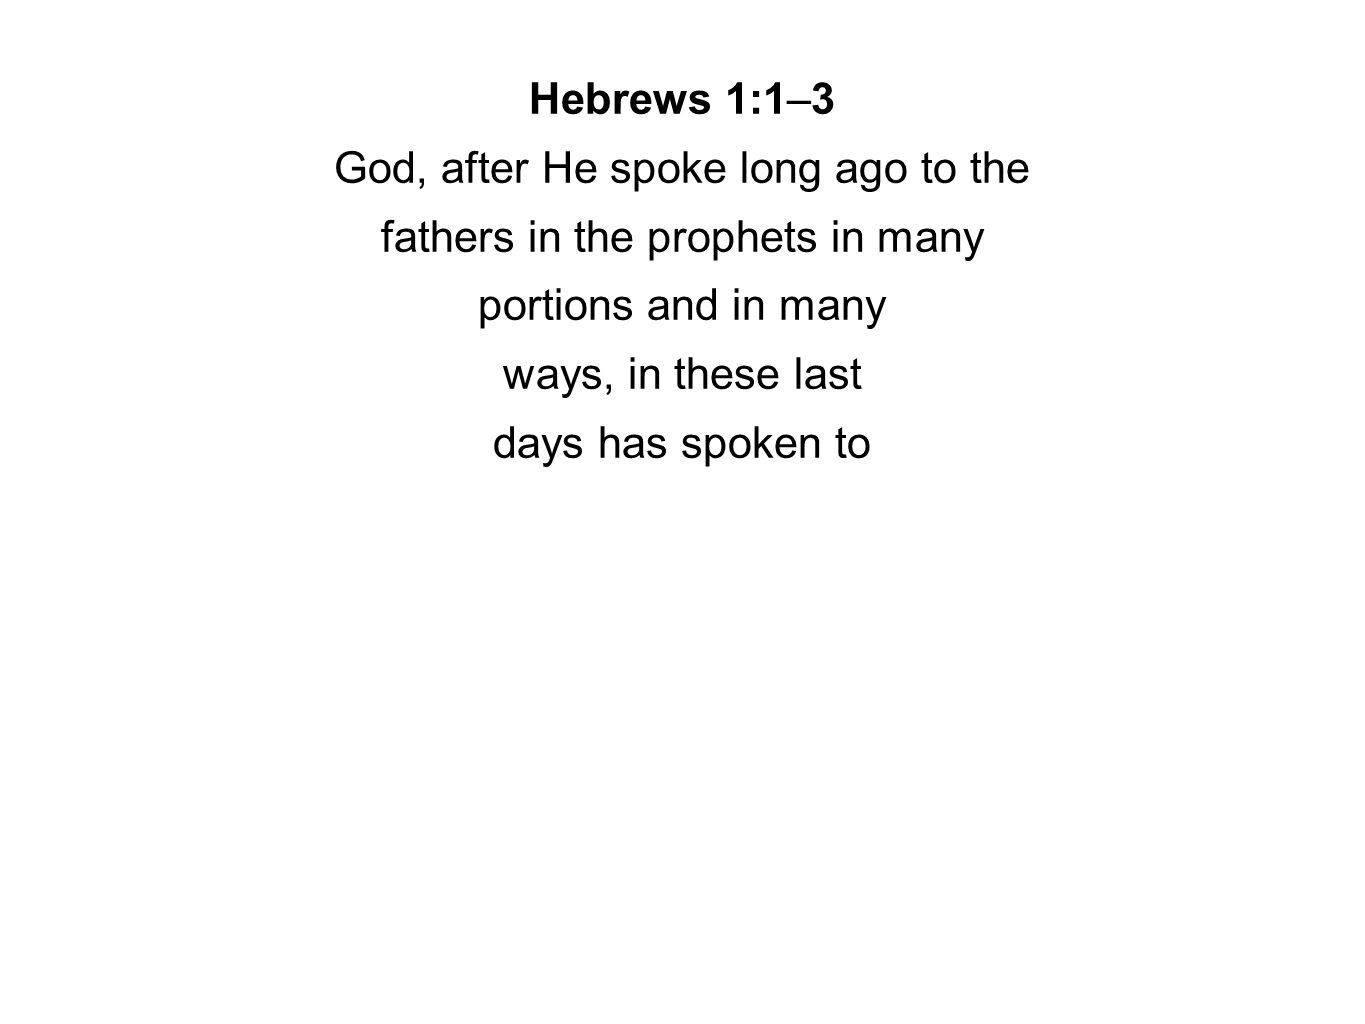 Hebrews 1:1–3 God, after He spoke long ago to the fathers in the prophets in many portions and in many ways, in these last days has spoken to